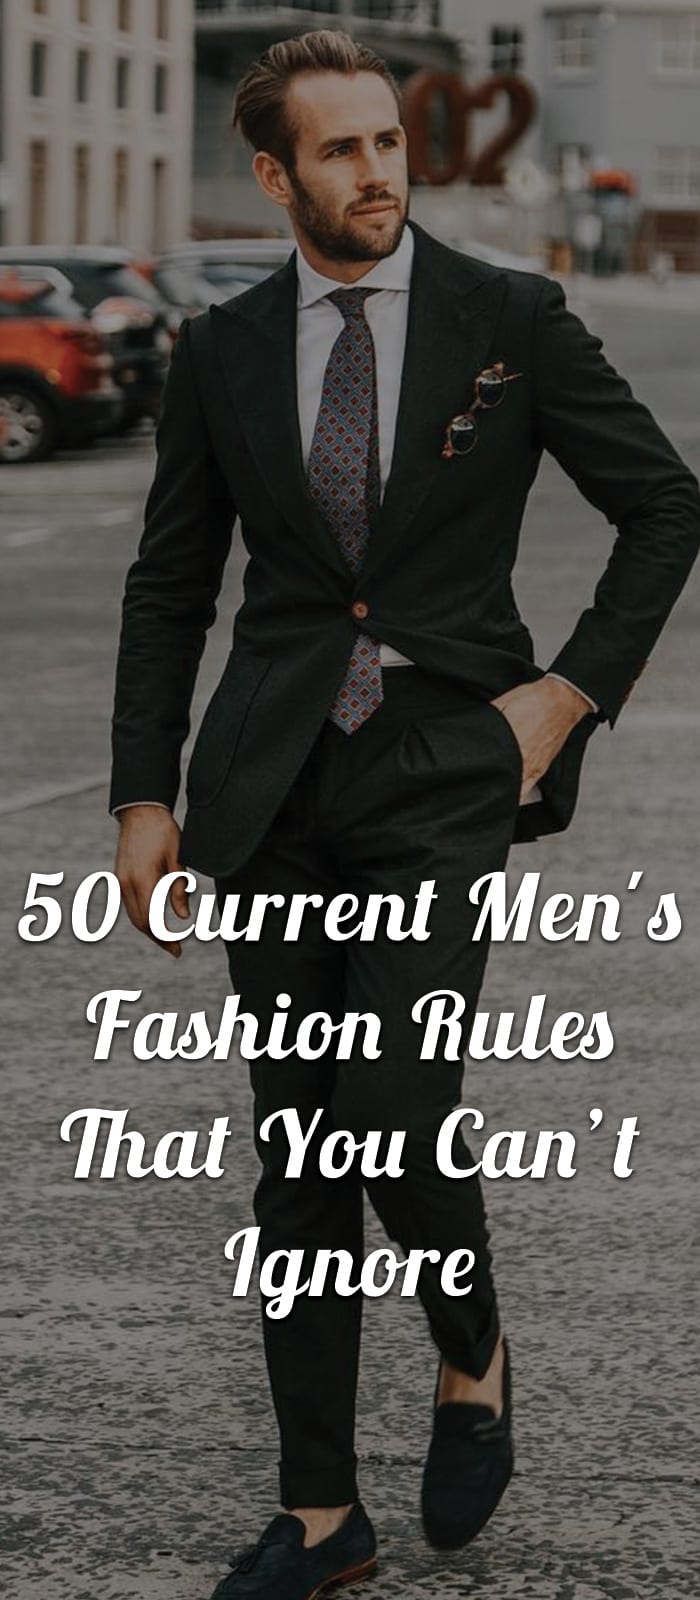 50-Current-Men's-Fashion-Rules-That-You-Can’t-Ignore